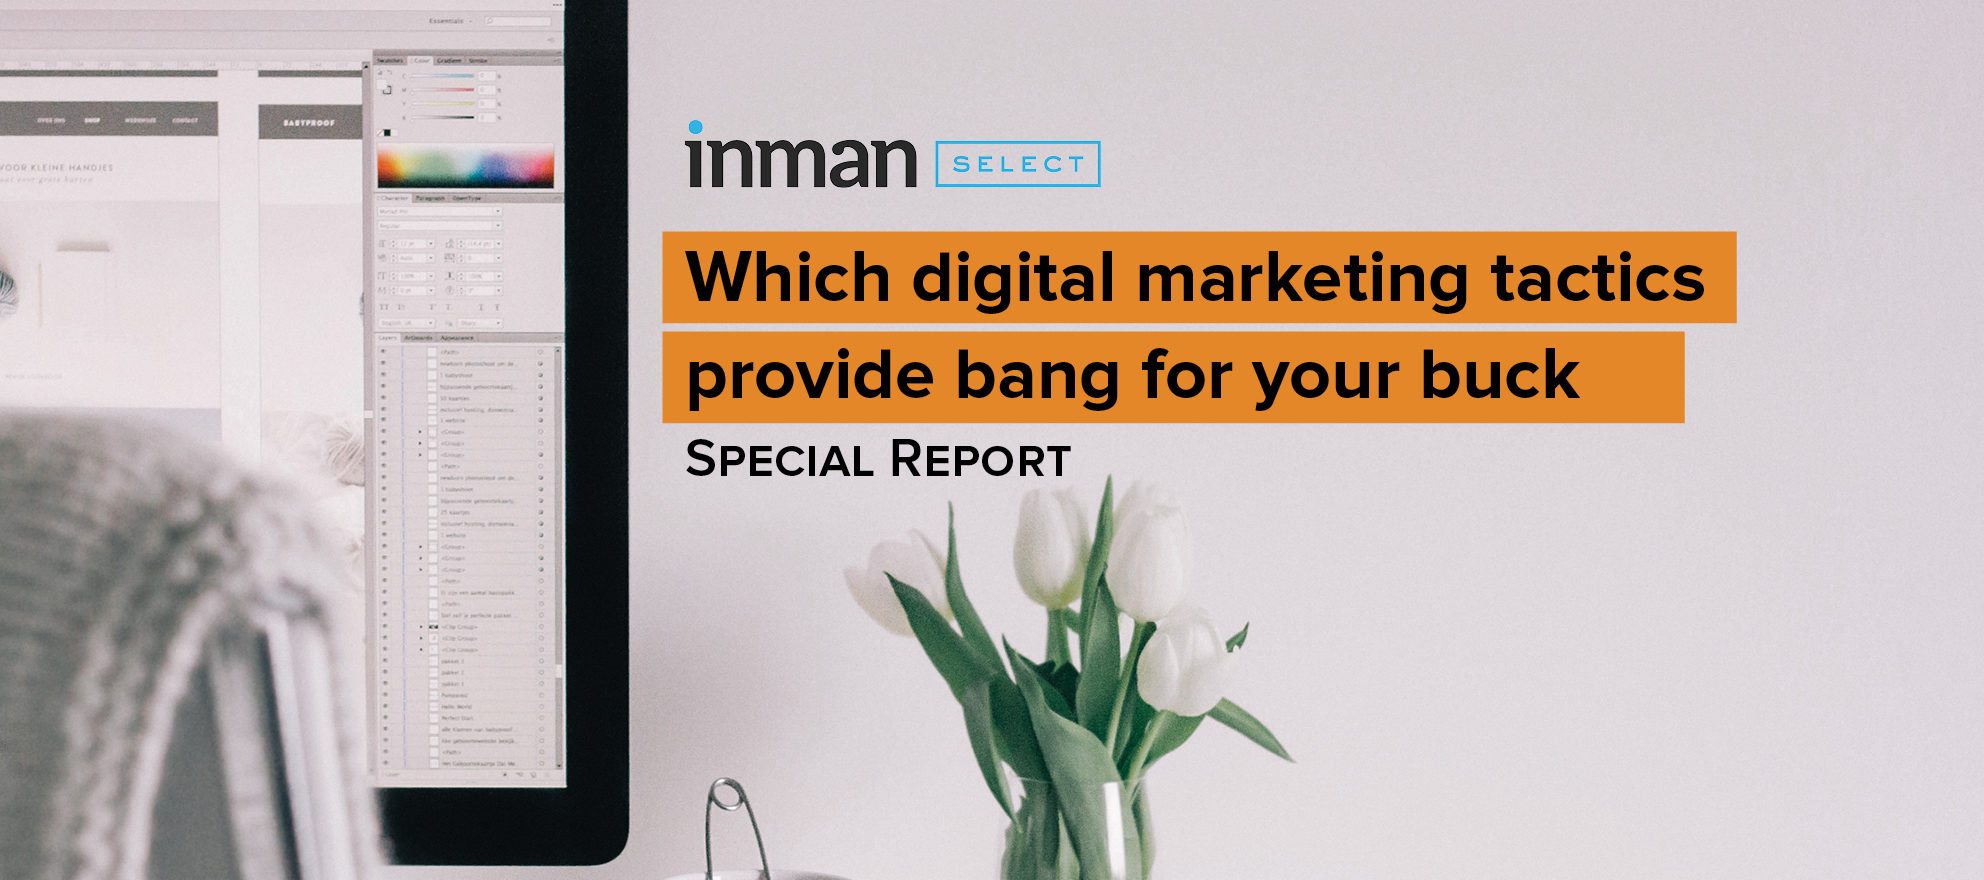 Special report: Which digital marketing tactics provide bang for your buck -- and which are just a bust